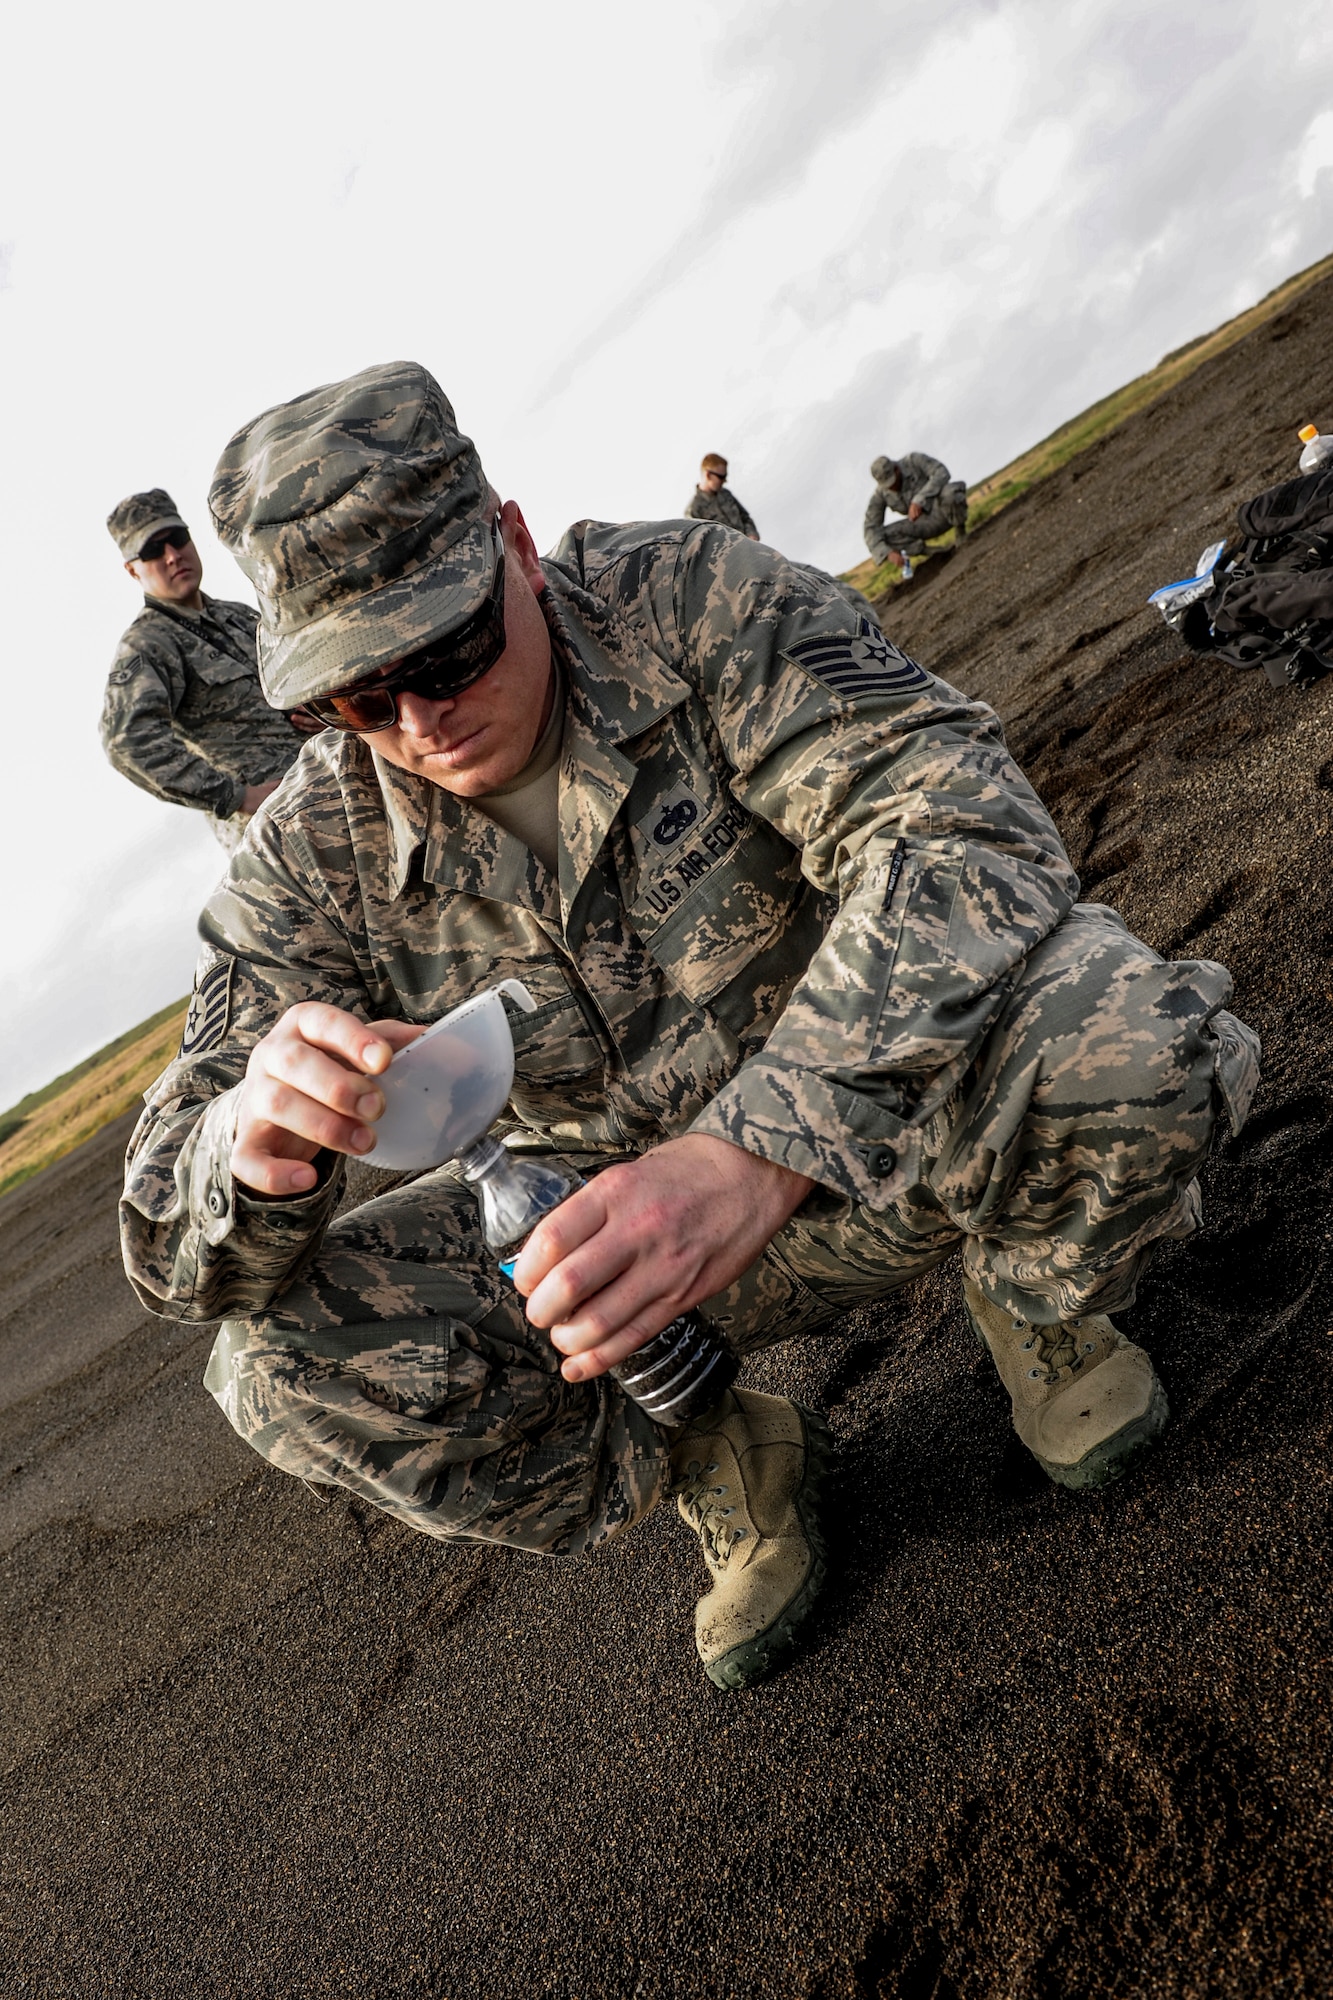 Tech. Sgt. Benjamin Weisensel, 733rd Air Mobility Squadron unit deployment manager, funnels sand into a bottle Jan. 8, 2015, on the shores of Iwo To, Japan. This is the location where thousands of Marines landed during the battle of Iwo Jima. (U.S. Air Force photo by Airman 1st Class John Linzmeier)